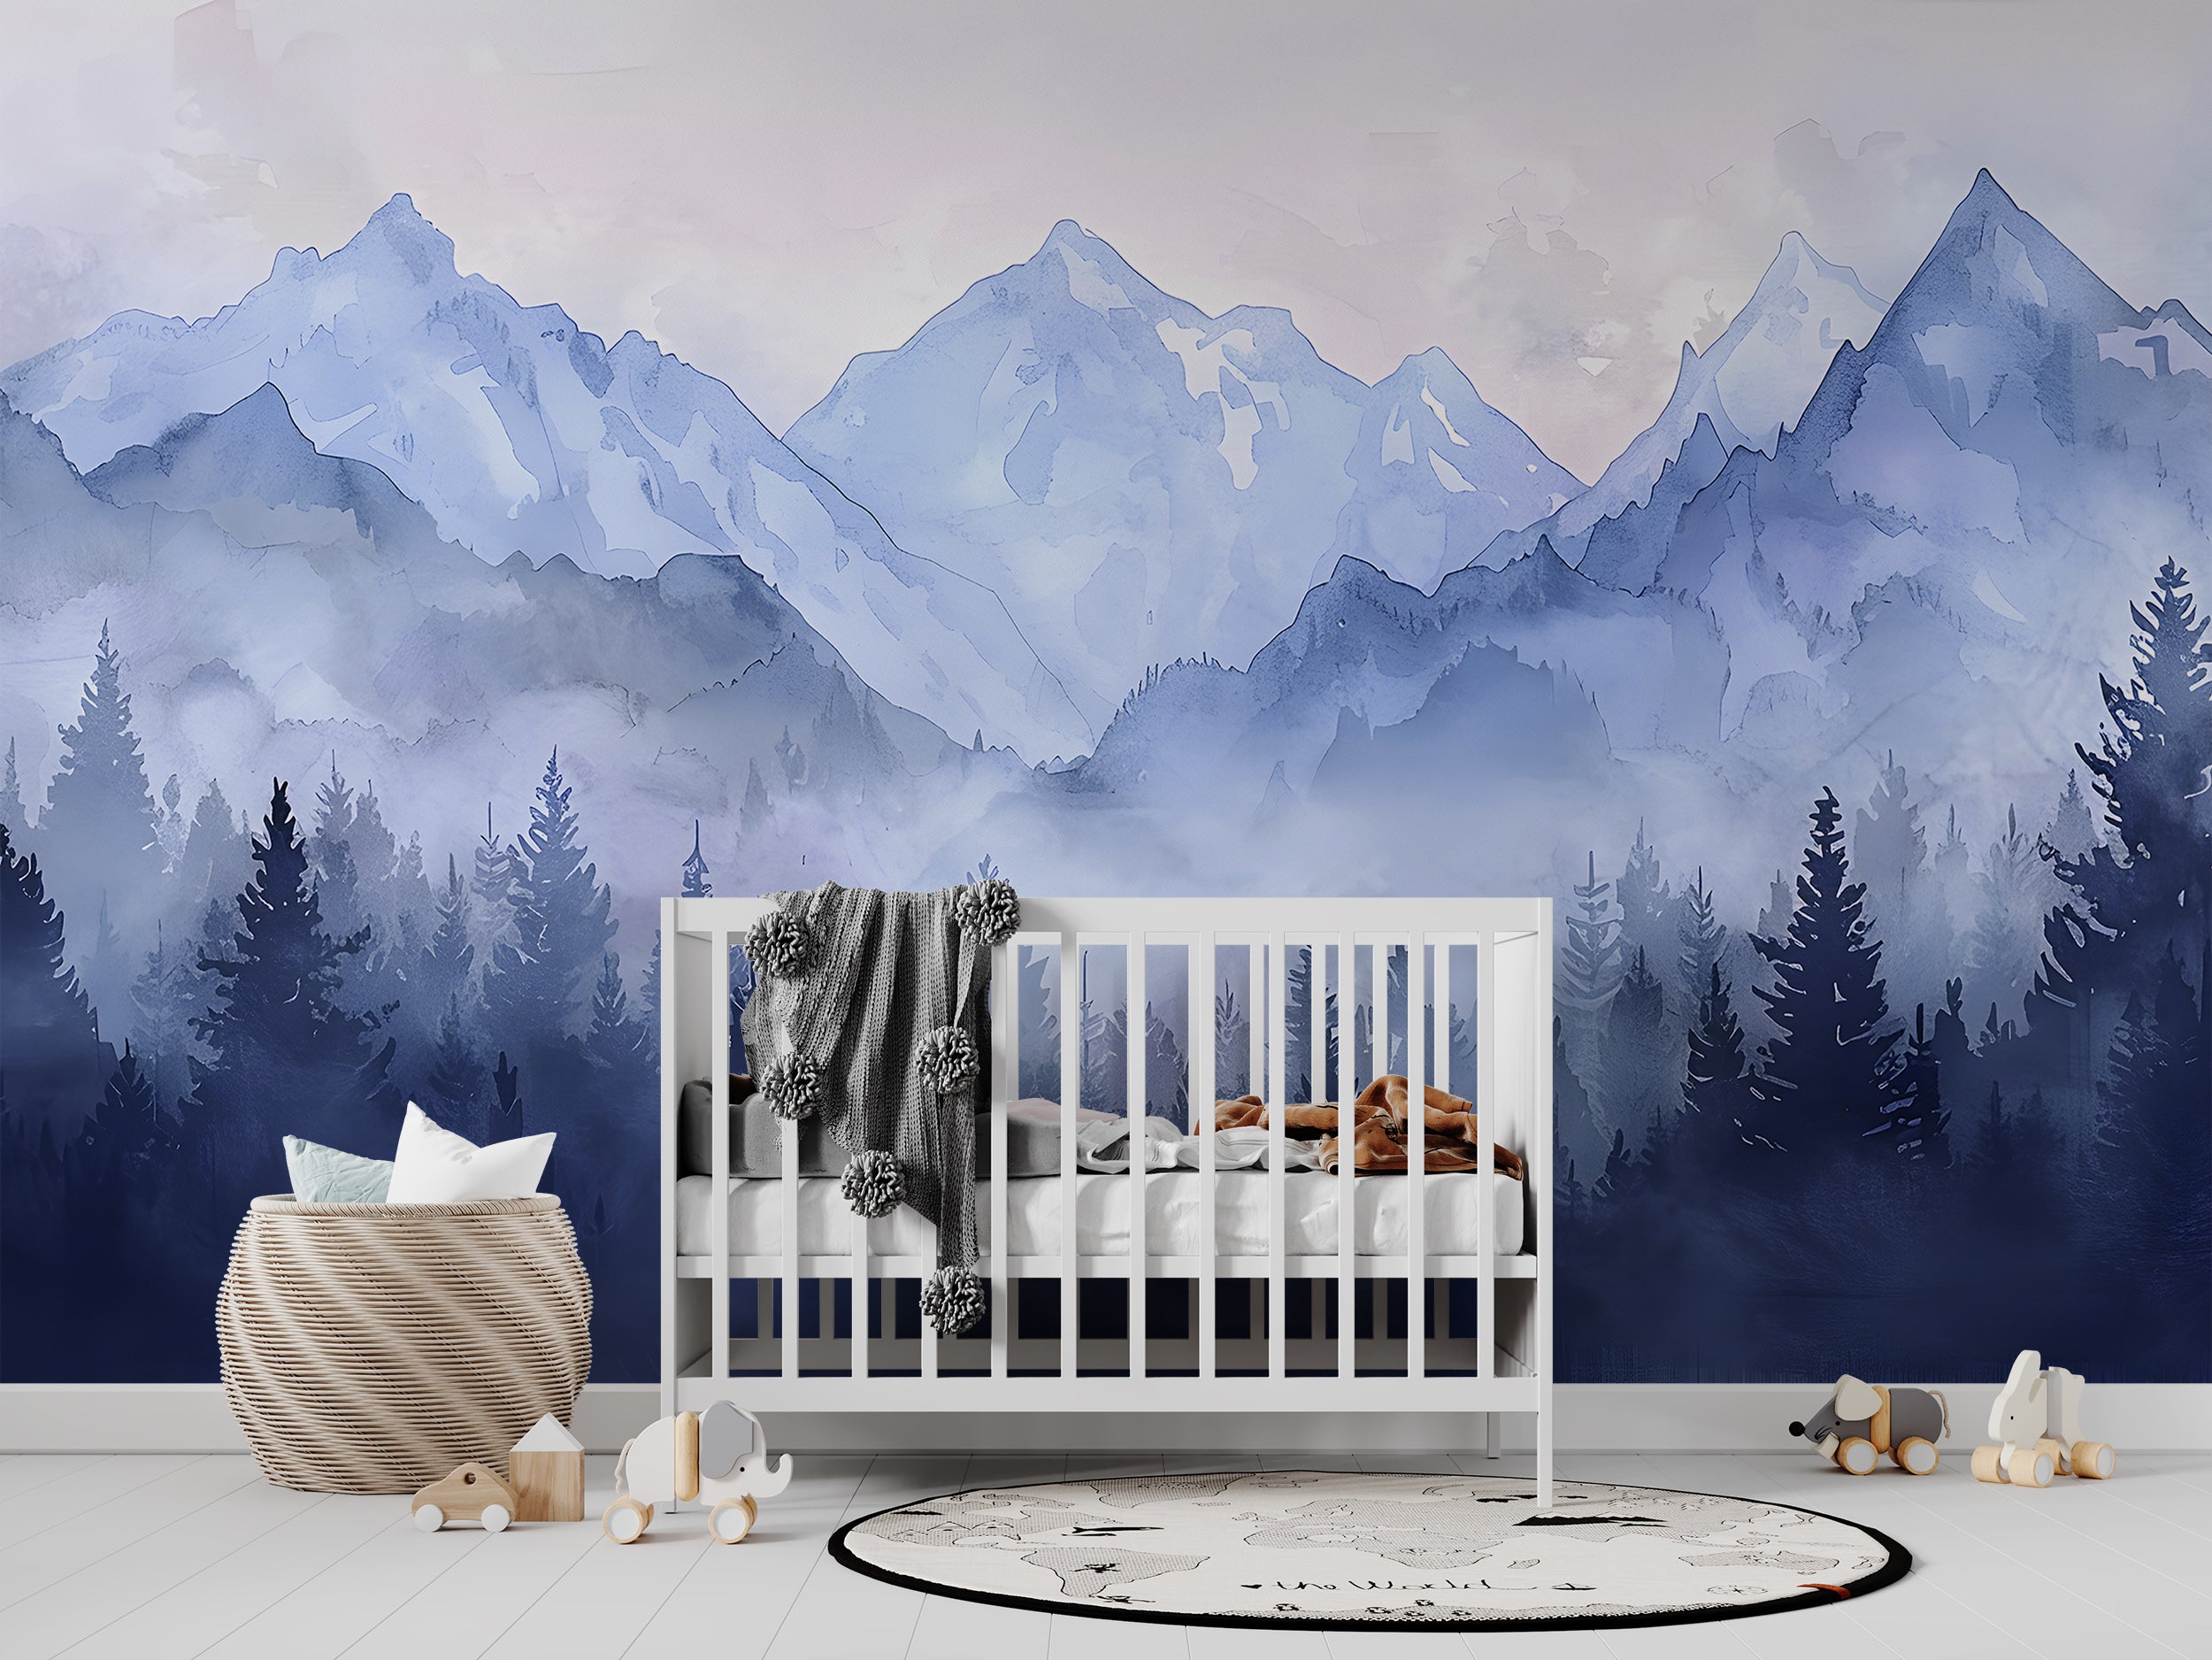 Watercolor Pastel Blue Mountains Mural, Forest and Mountain Landscape Wallpaper, Self-adhesive Removable Blue Nature Nursery Decal